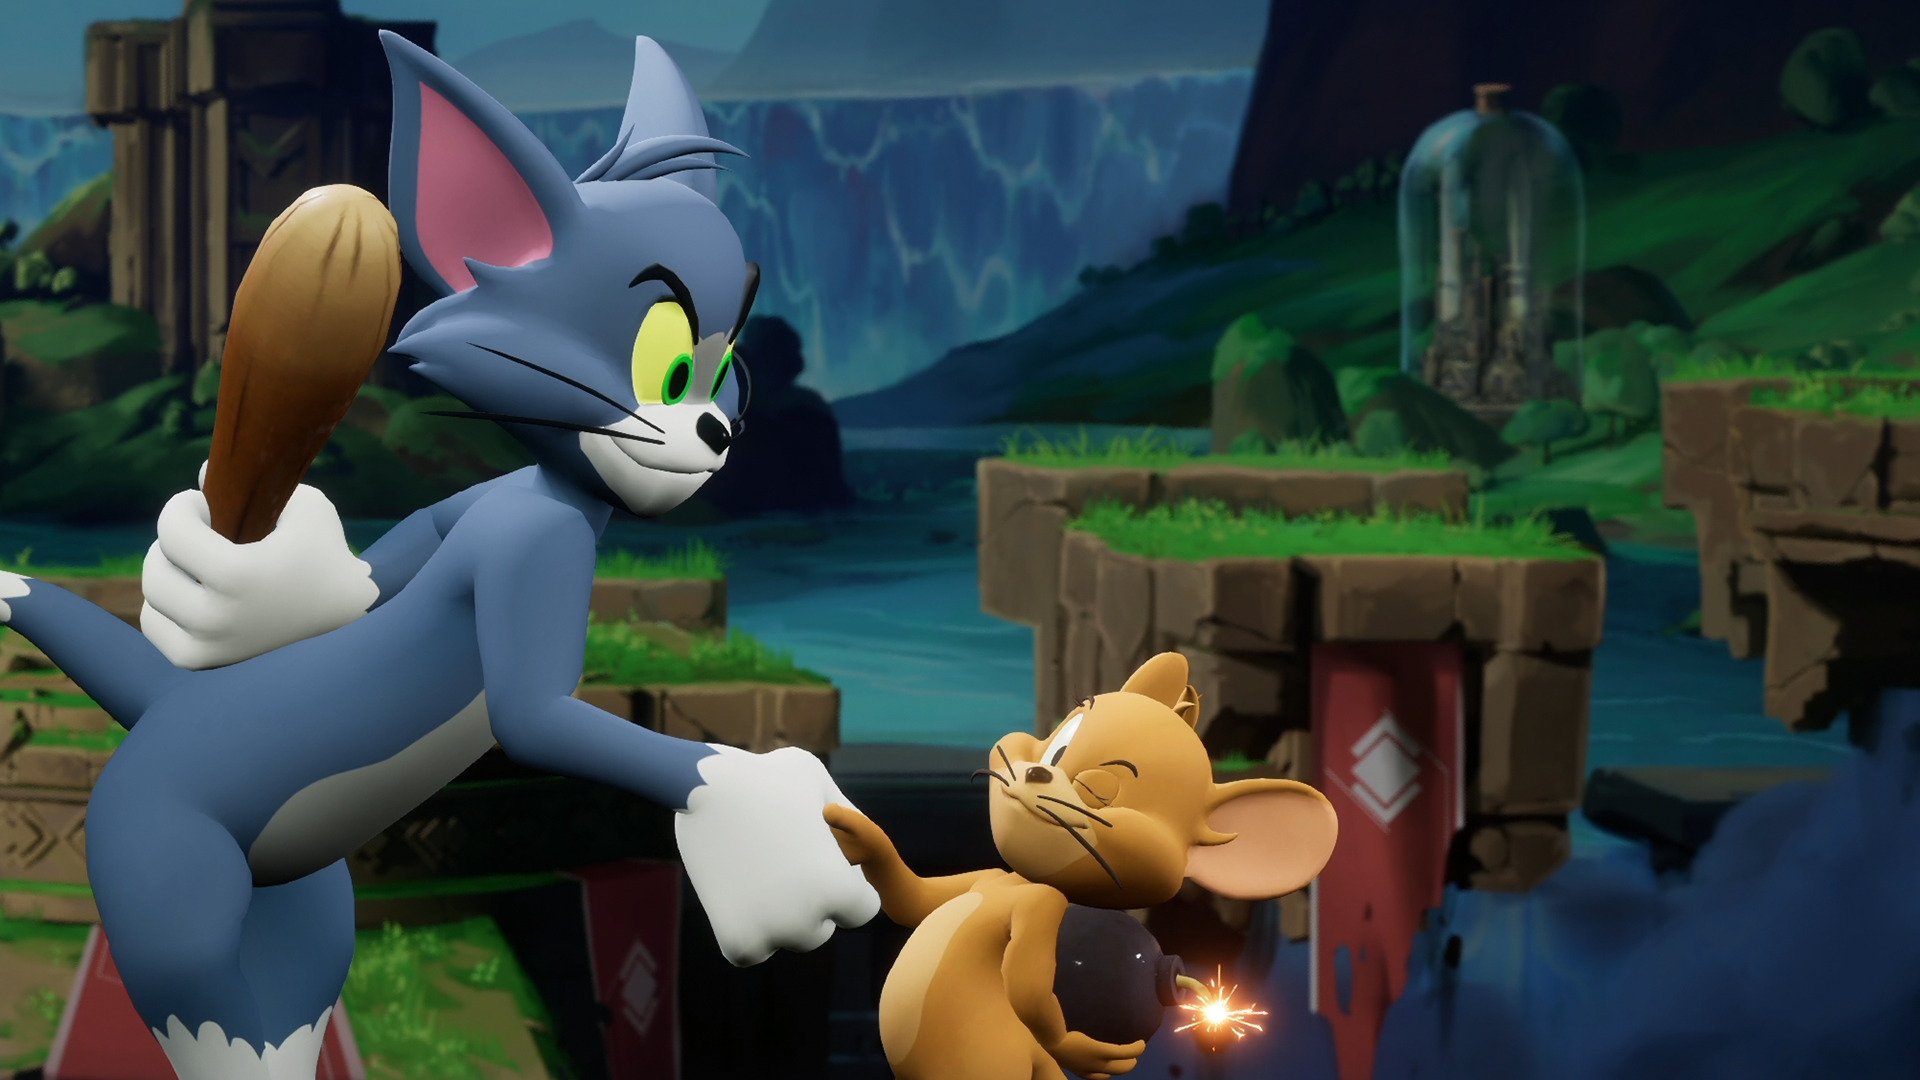 Play Tom and Jerry games, Free online Tom and Jerry games